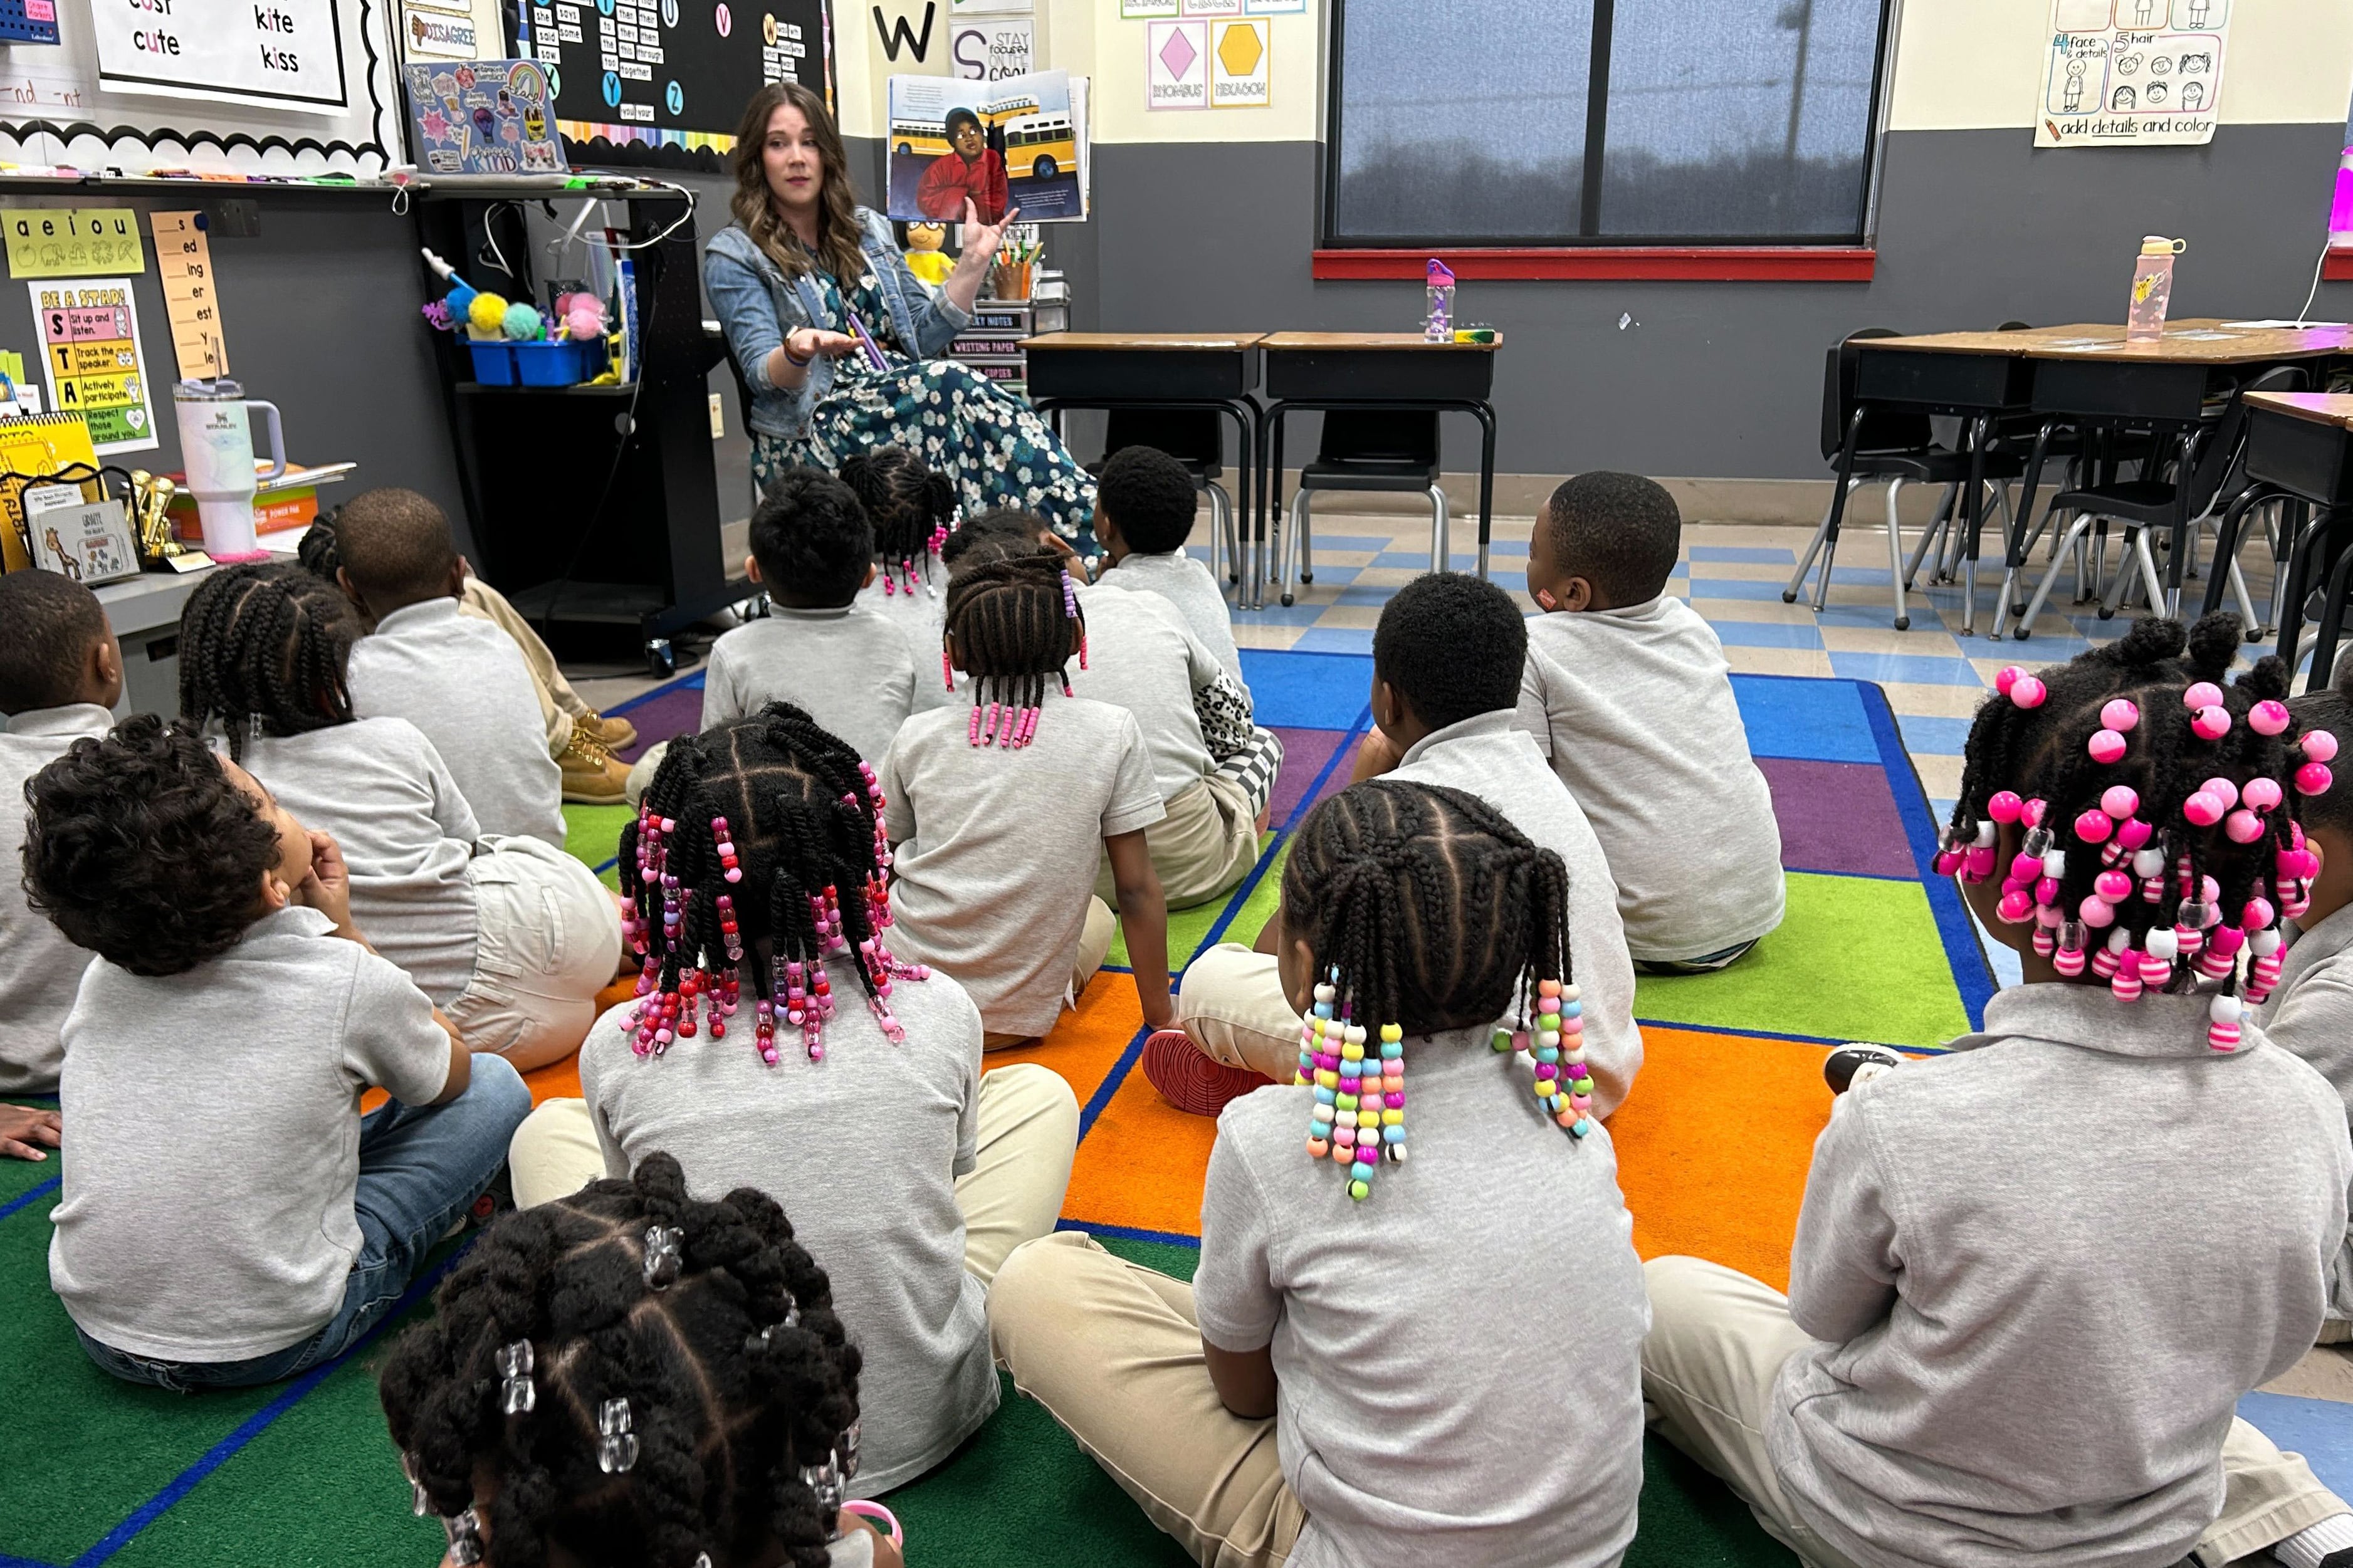 A teacher with long brown hair holds up a picture book to a class full of young students sitting on a colorful rug in a classroom. Students are wearing a grey shirt and light tan pants as a uniform and many students have colorful beads in their braids.